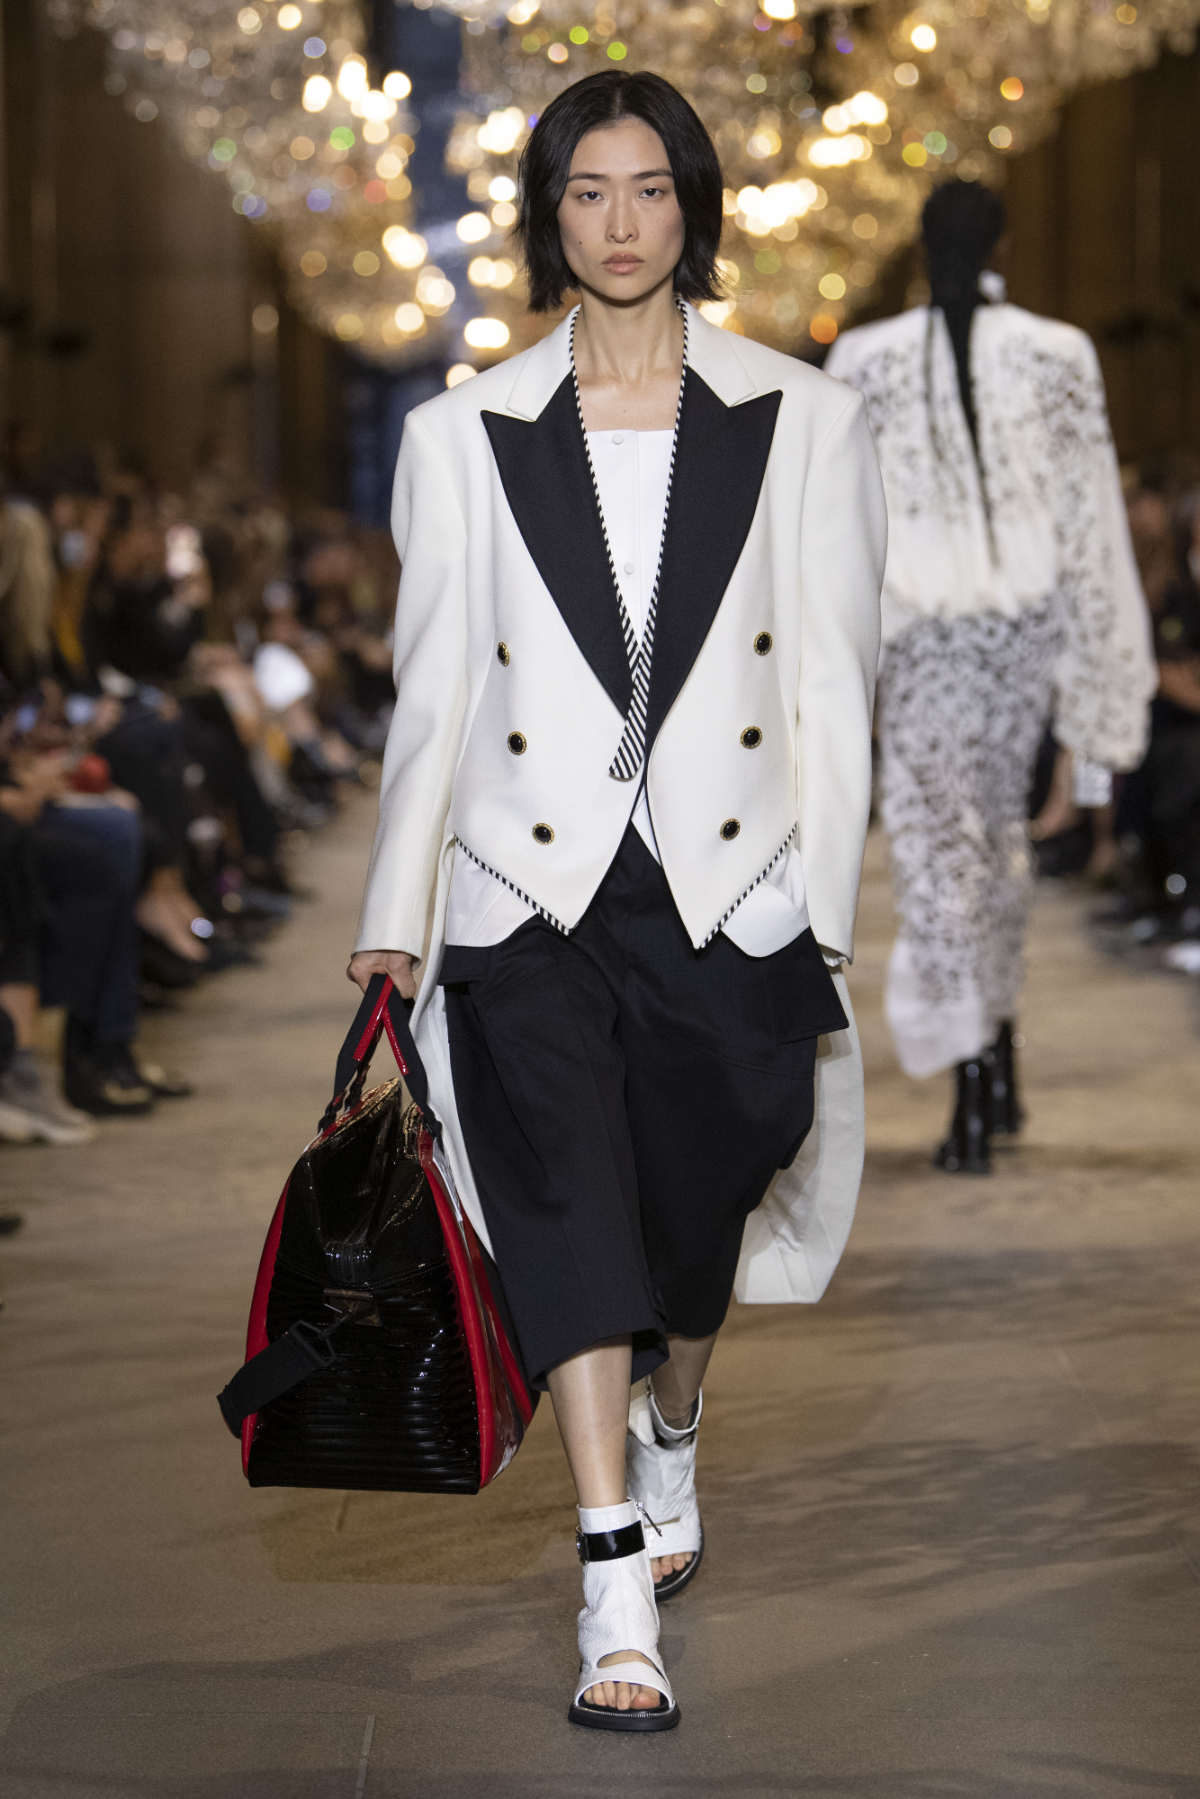 Louis Vuitton Presents Its New Spring-Summer 2022 Women's Collection